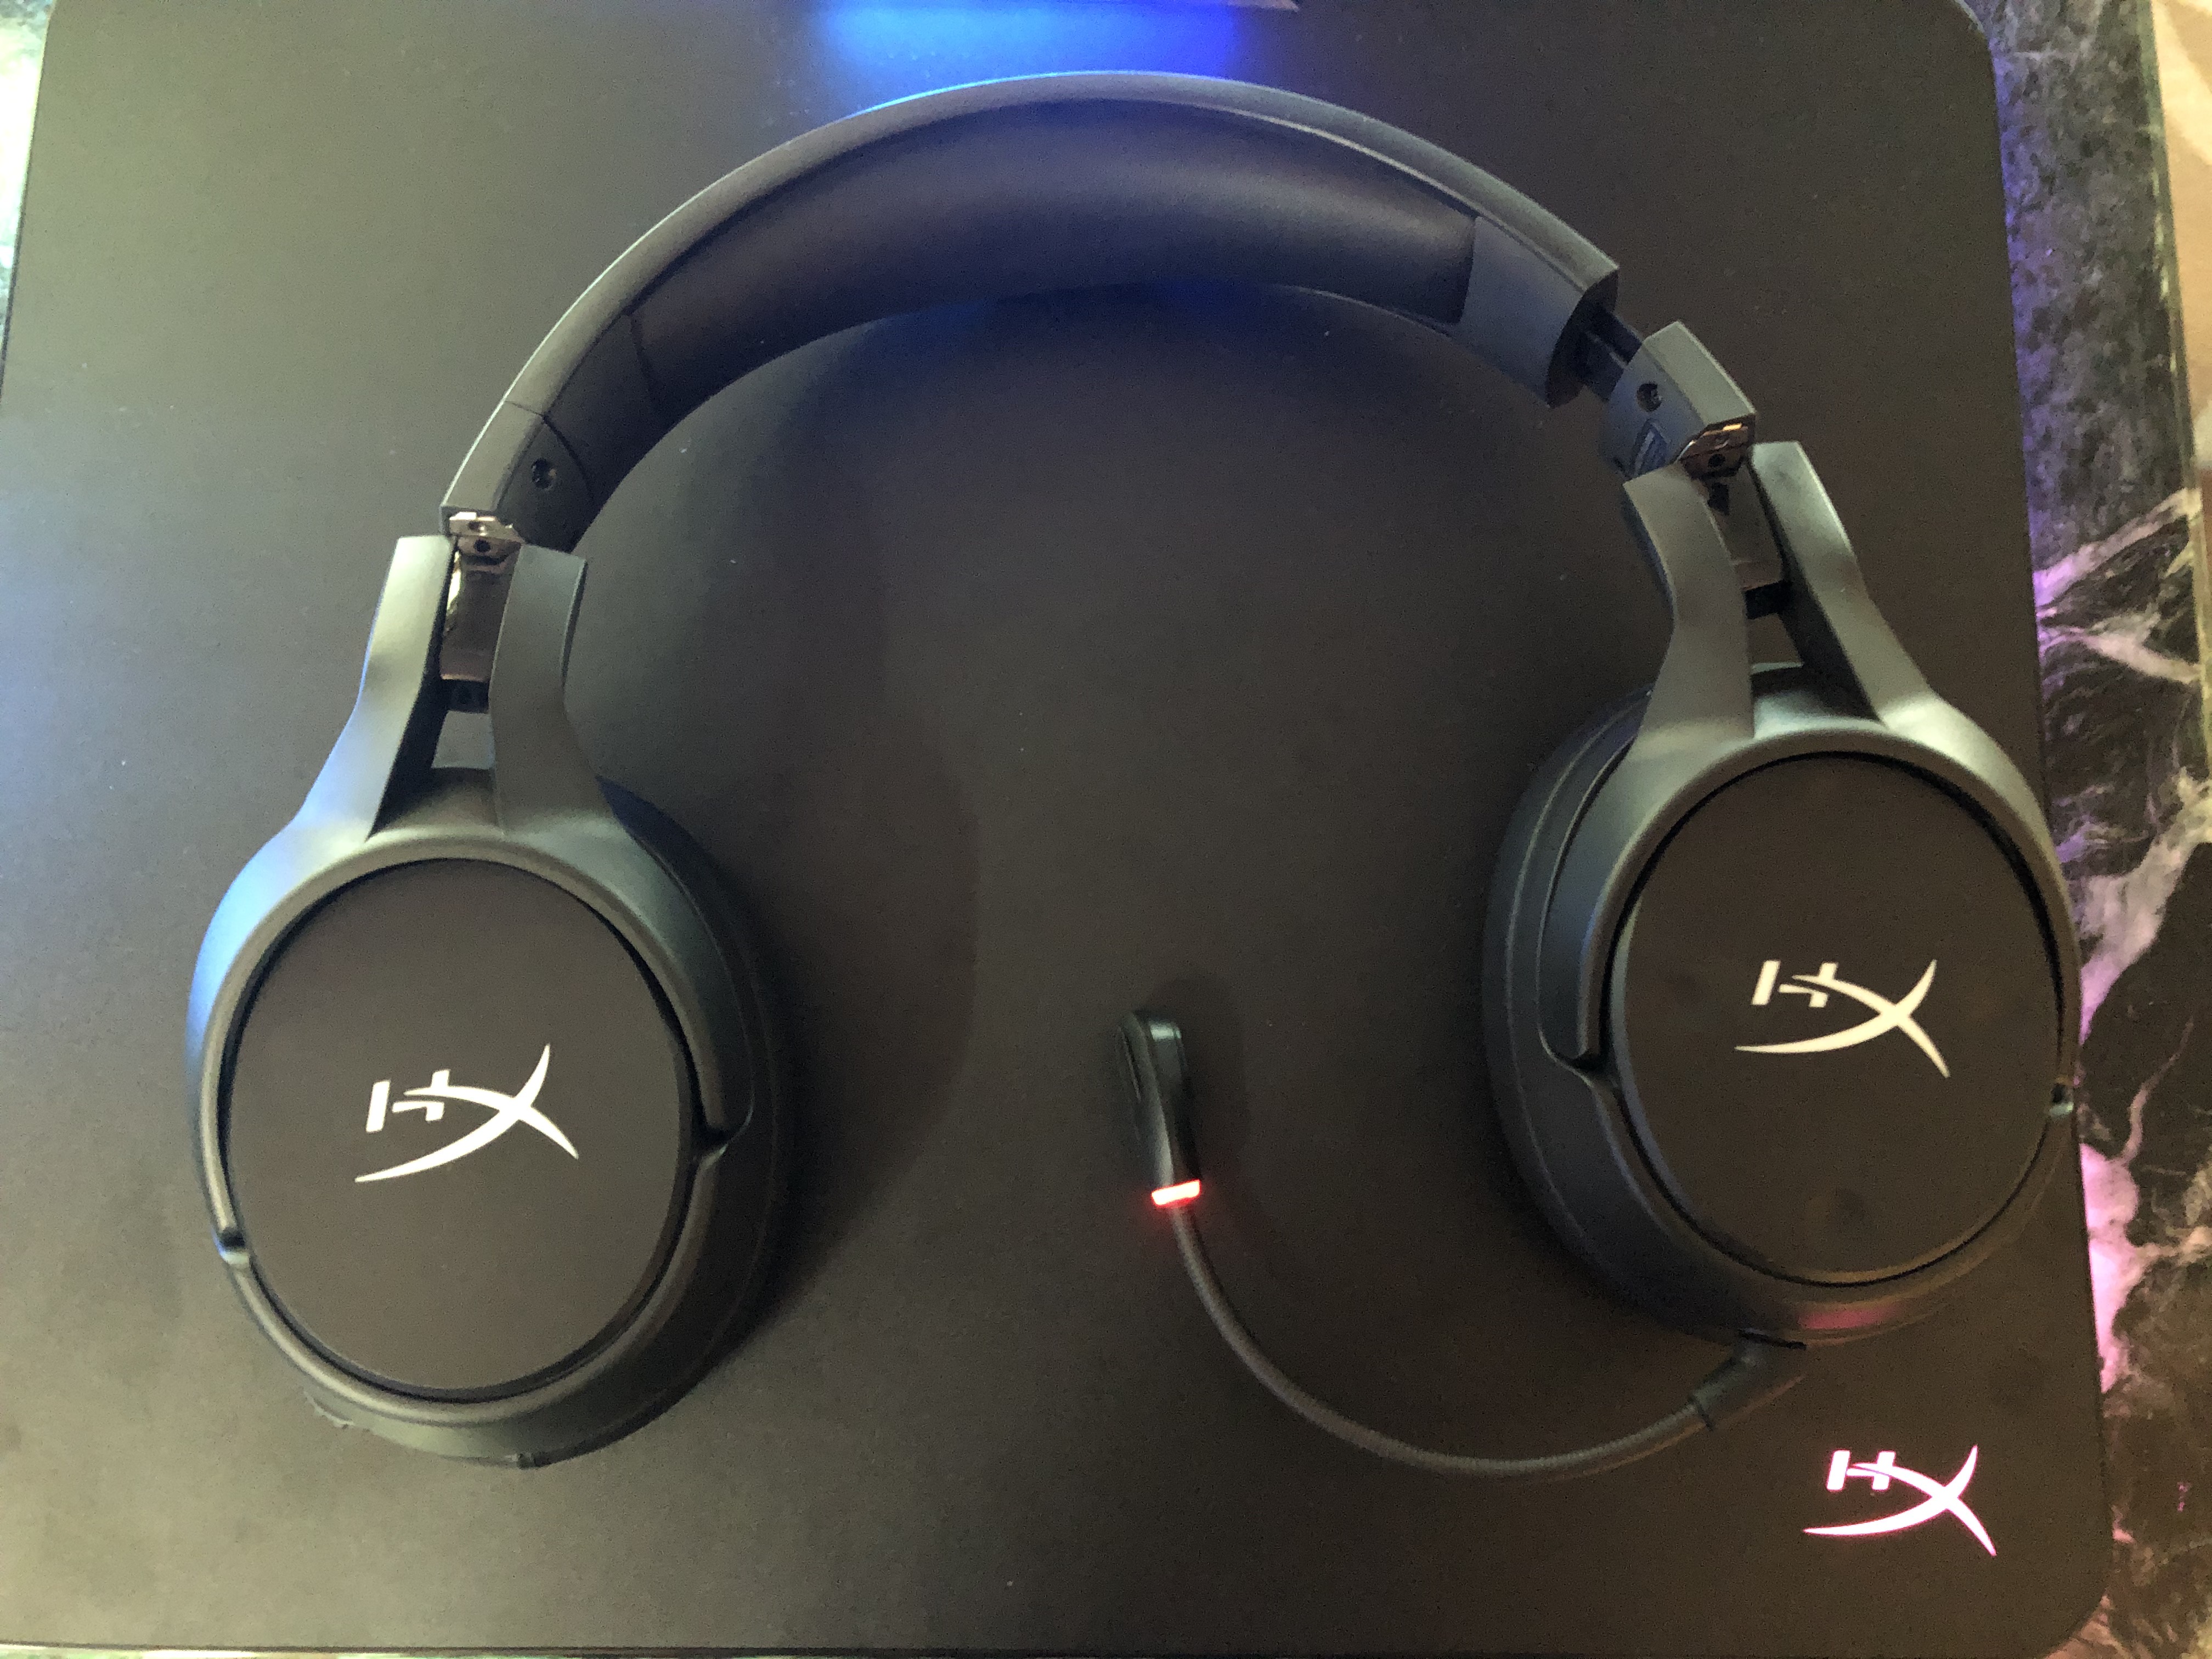 Hands On With Hyperx S First Qi Enabled Headset The Cloud Flight S Tom S Hardware